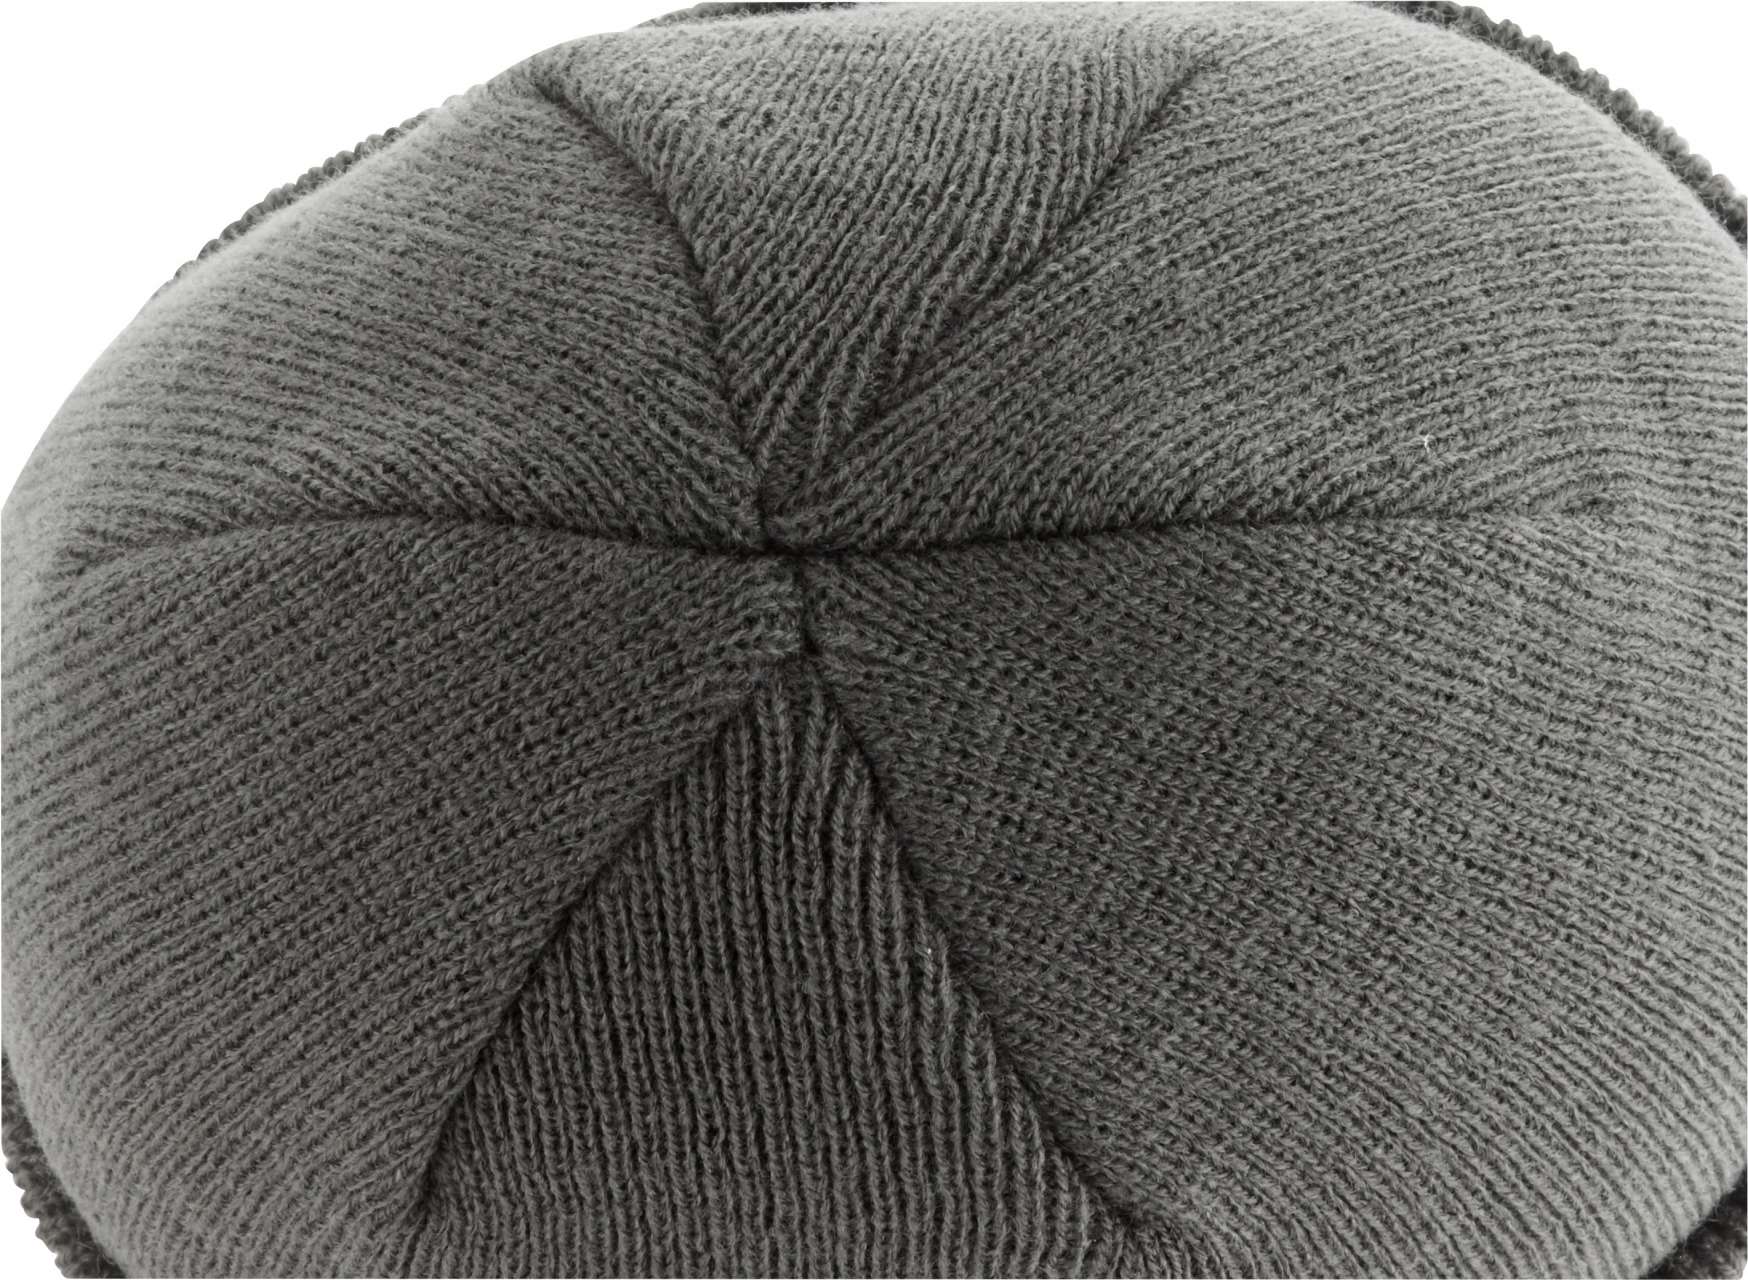 SOL'S PITTSBURGH - SOLID-COLOUR BEANIE WITH CUFFED DESIGN